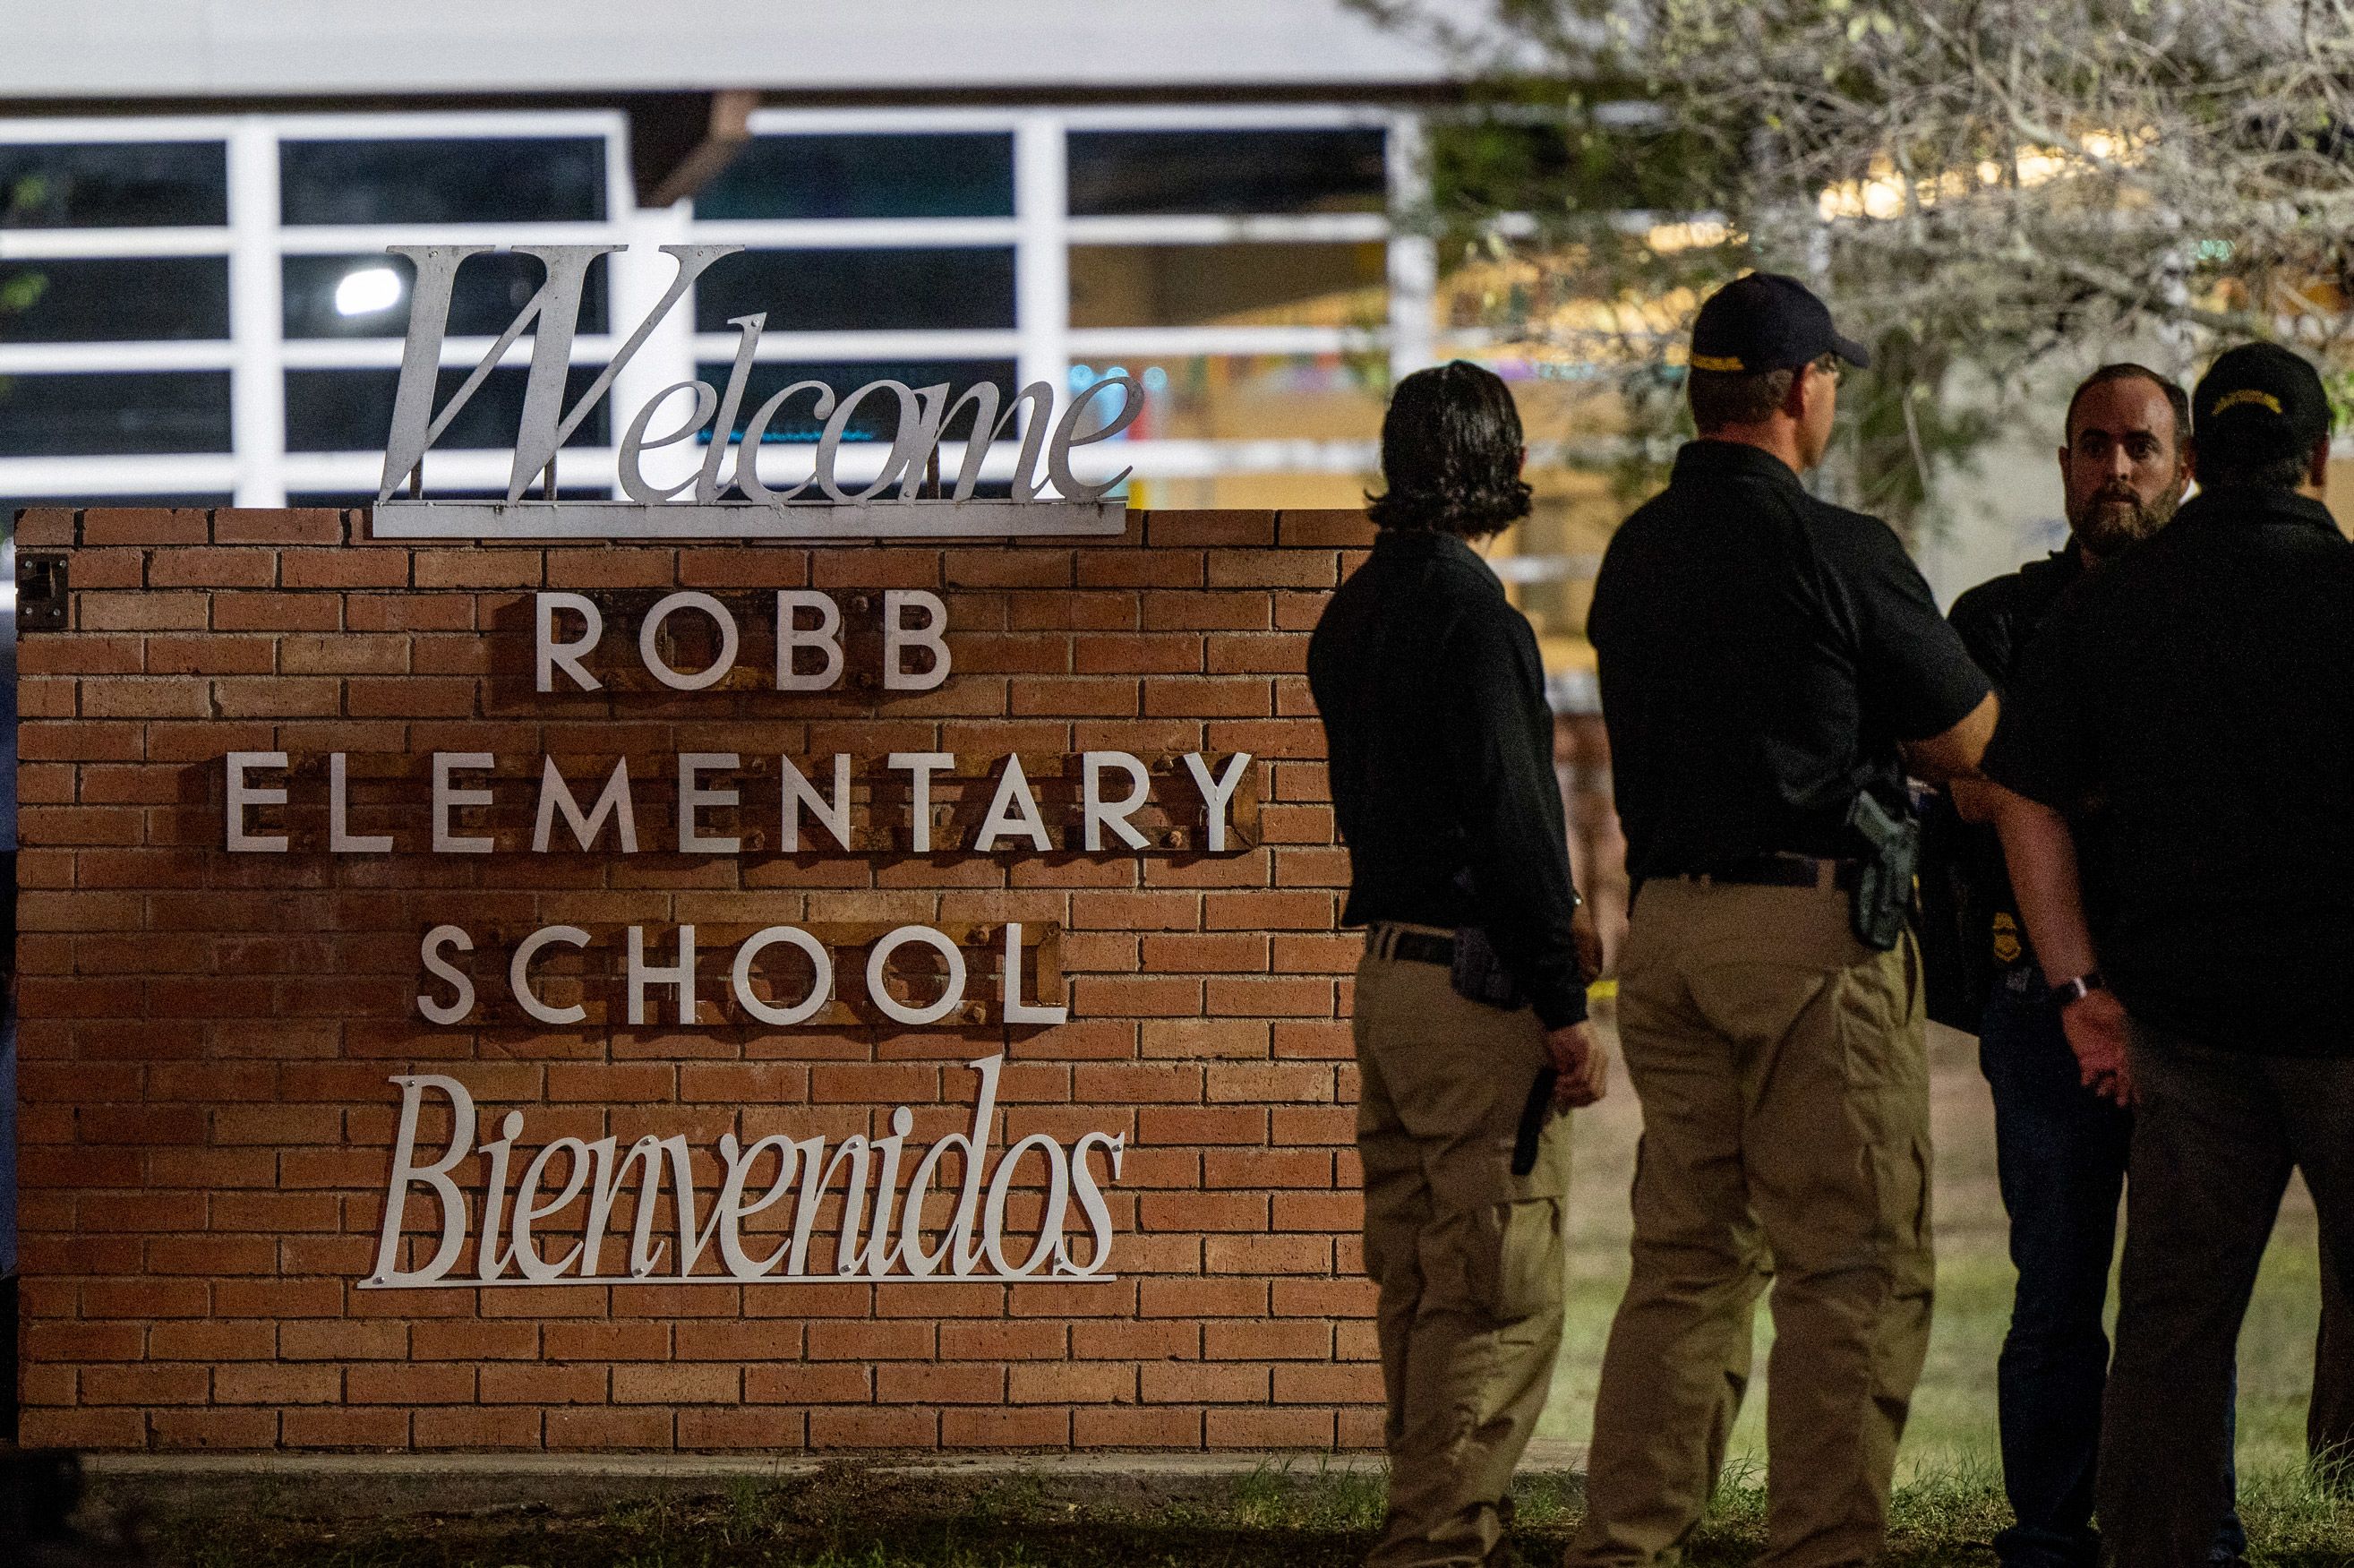 Uvalde Texas school shooting: What we know about the Texas elementary school  shooting that left 19 students and 2 teachers dead | CNN